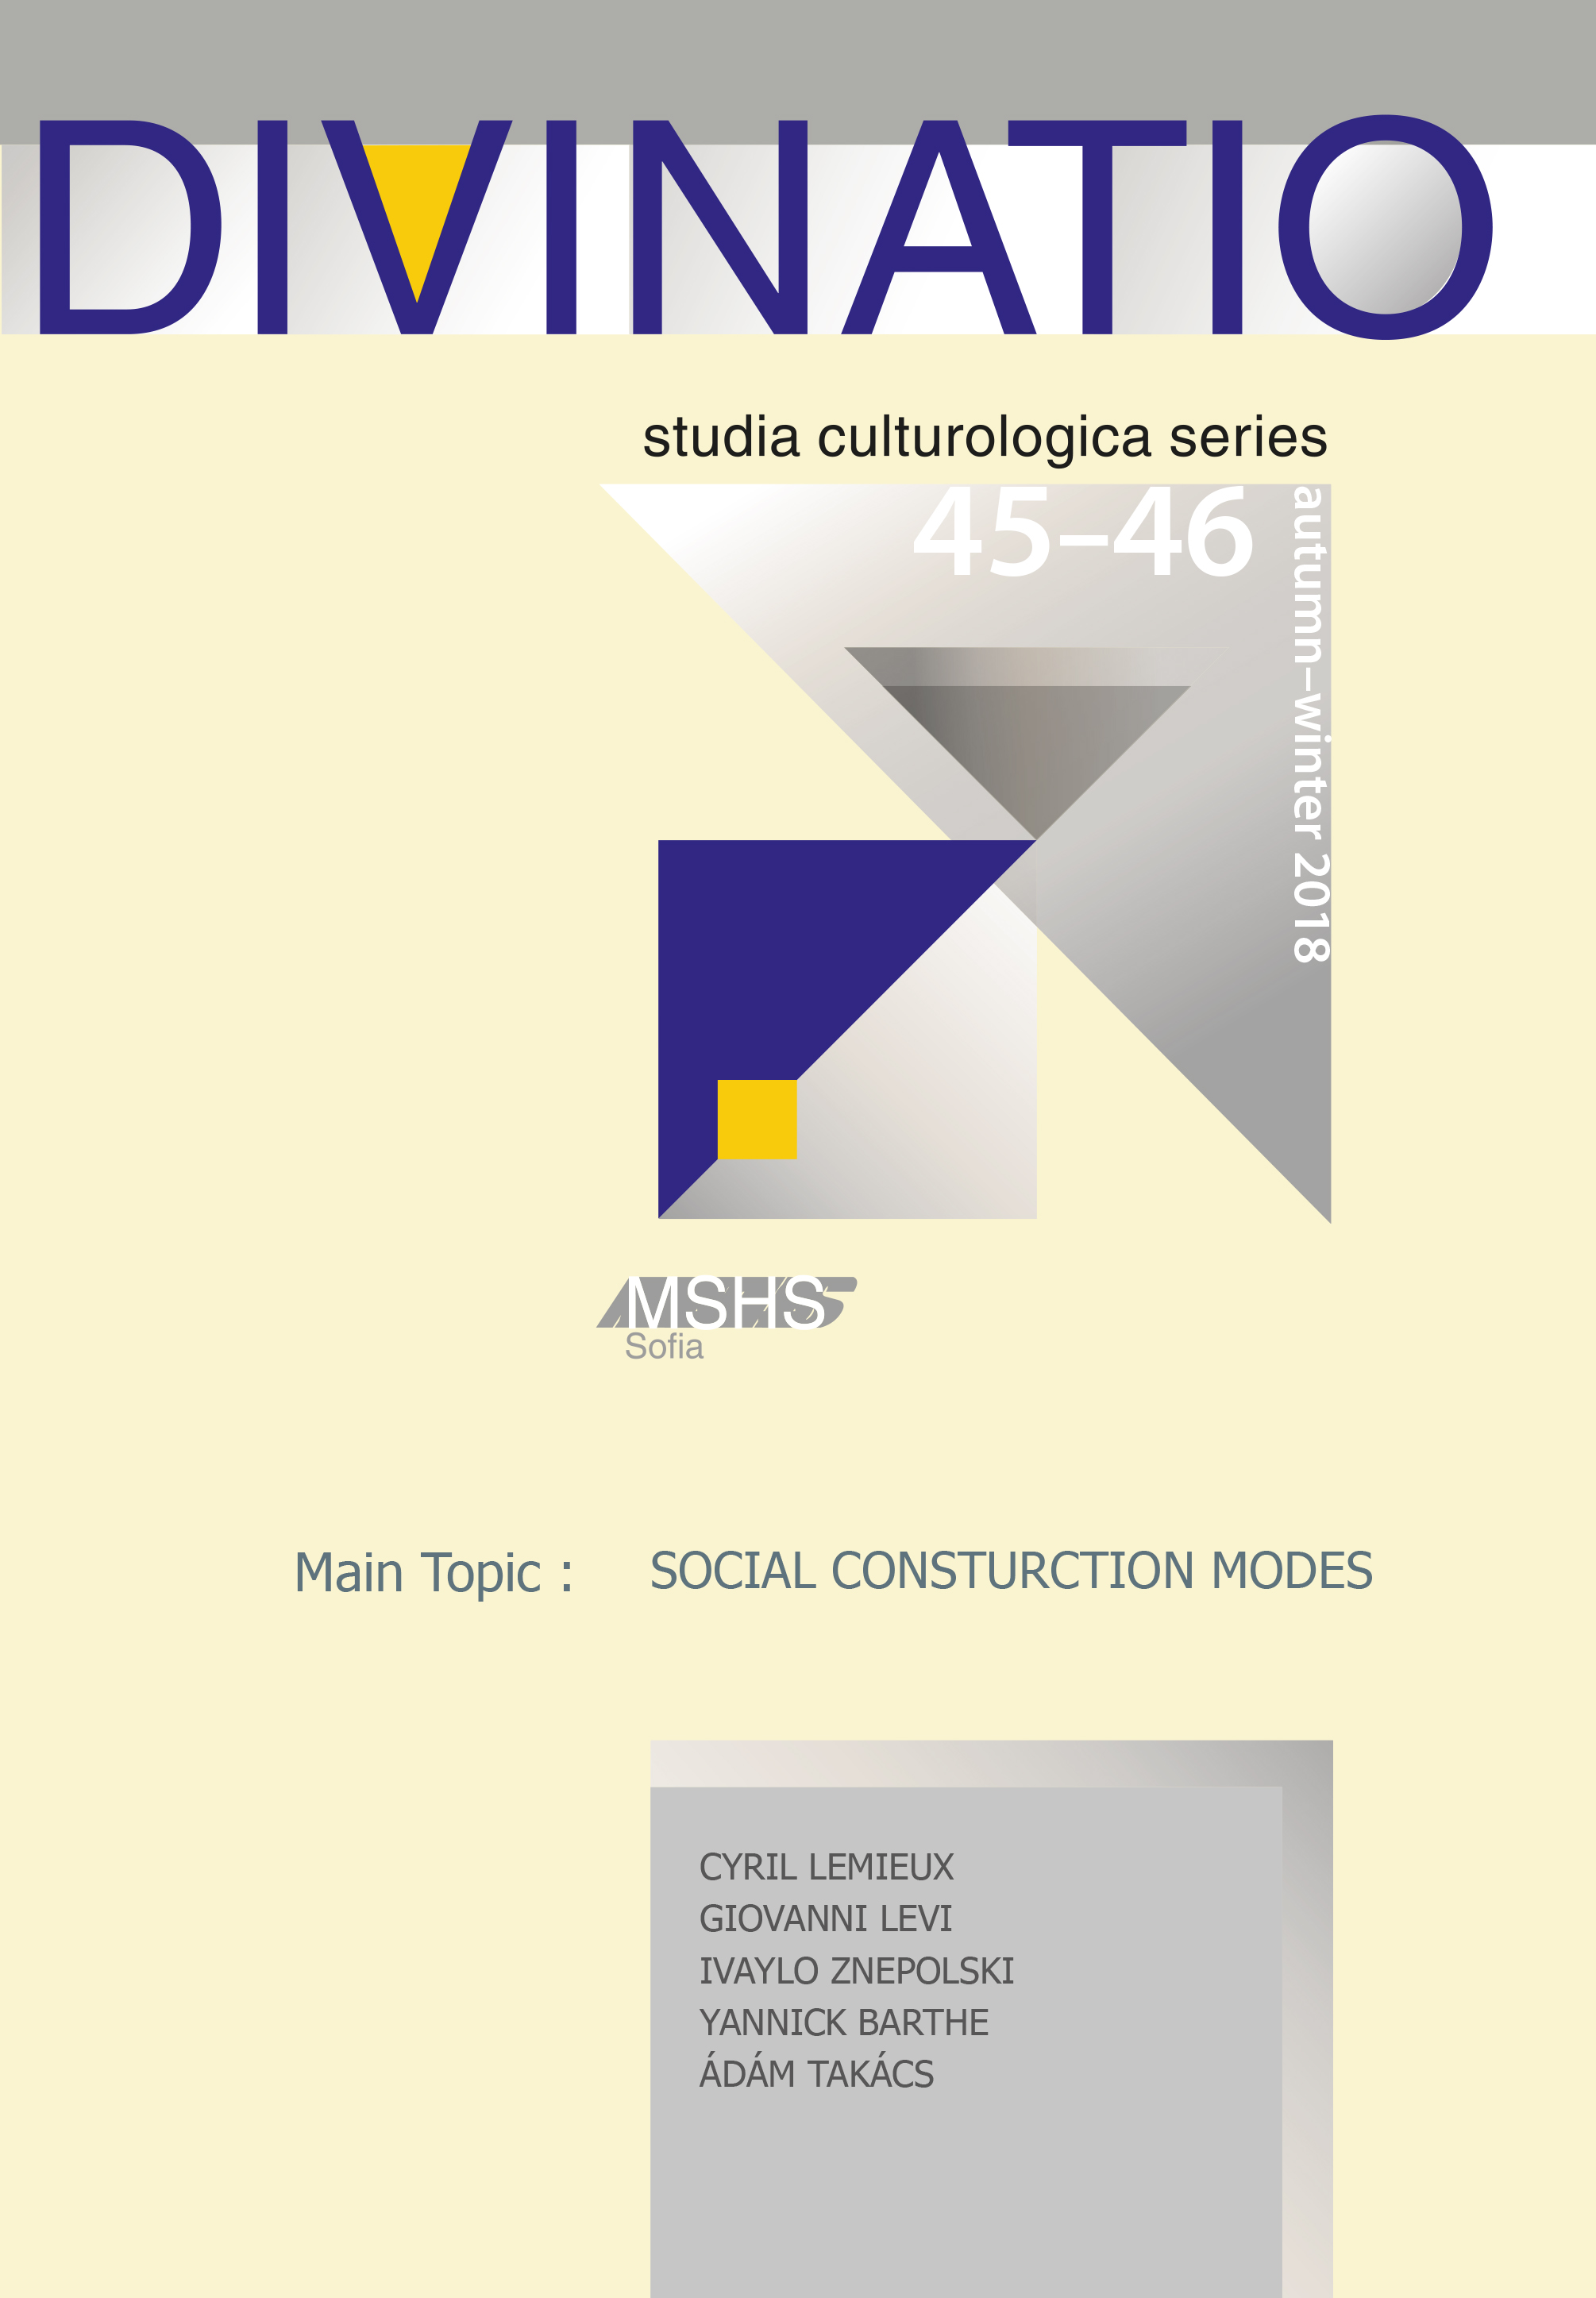 Disclosing and articulating early cubism as a cultural lifeform.